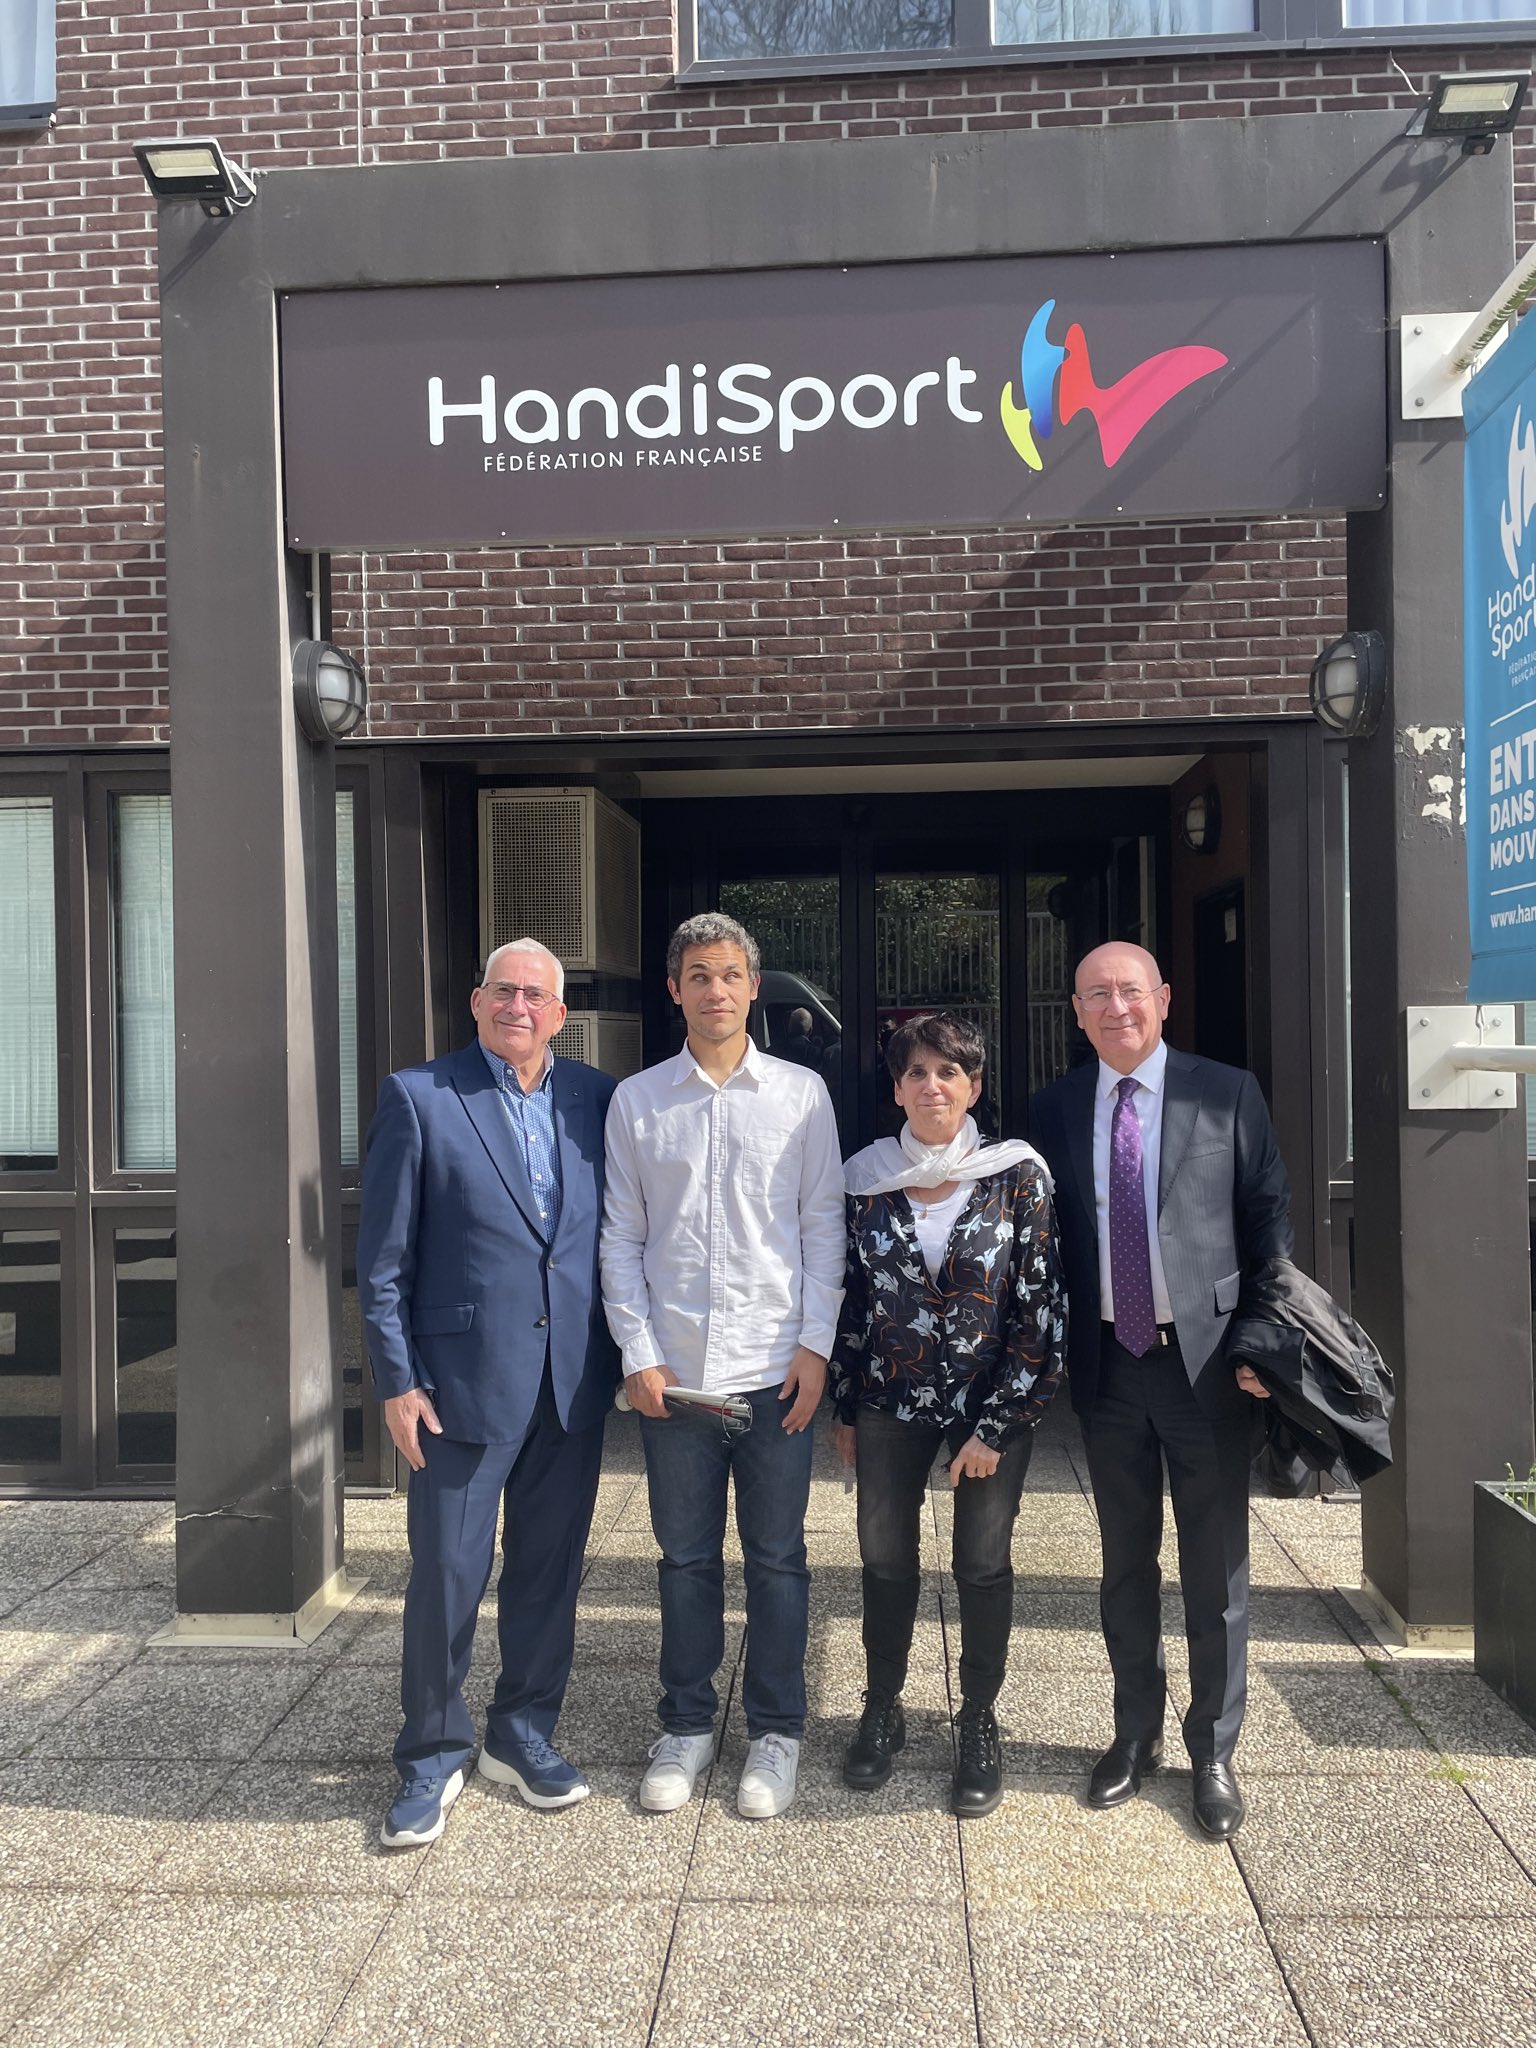 IBSA President Ilgar Rahimov and Executive Director Tony Sainsbury meet with Ghislaine Westlnyck and Gael Riviere outside the headquarters of Handisport